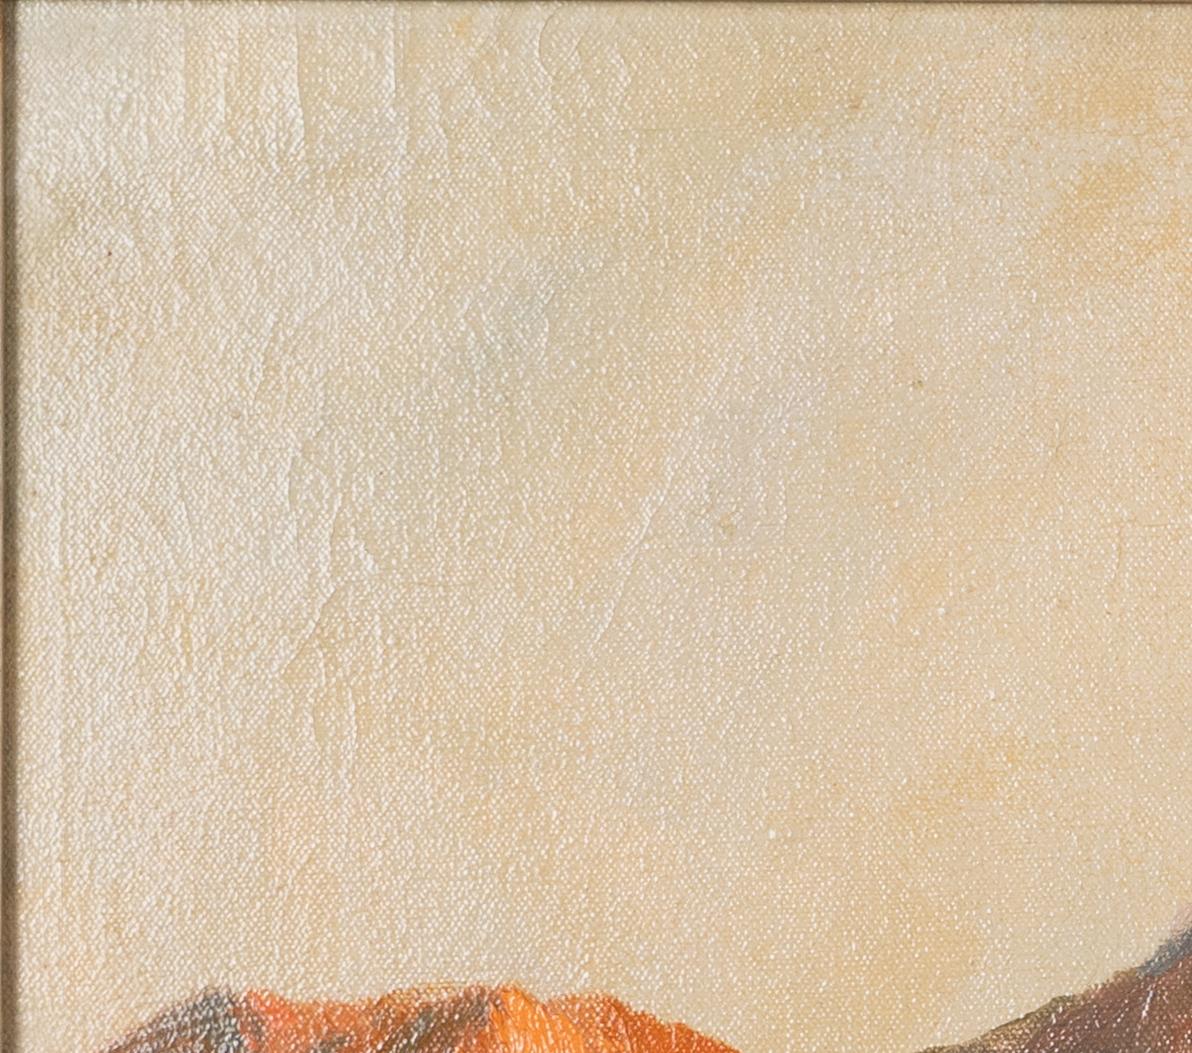 This painting by Campbell Scott portrays an expansive landscape scene of a lake and mountains with muted sunlight casting a golden hue on the water and salmon pink on the mountains. The painting is encased in an exquisite silver-gilt wooden hand